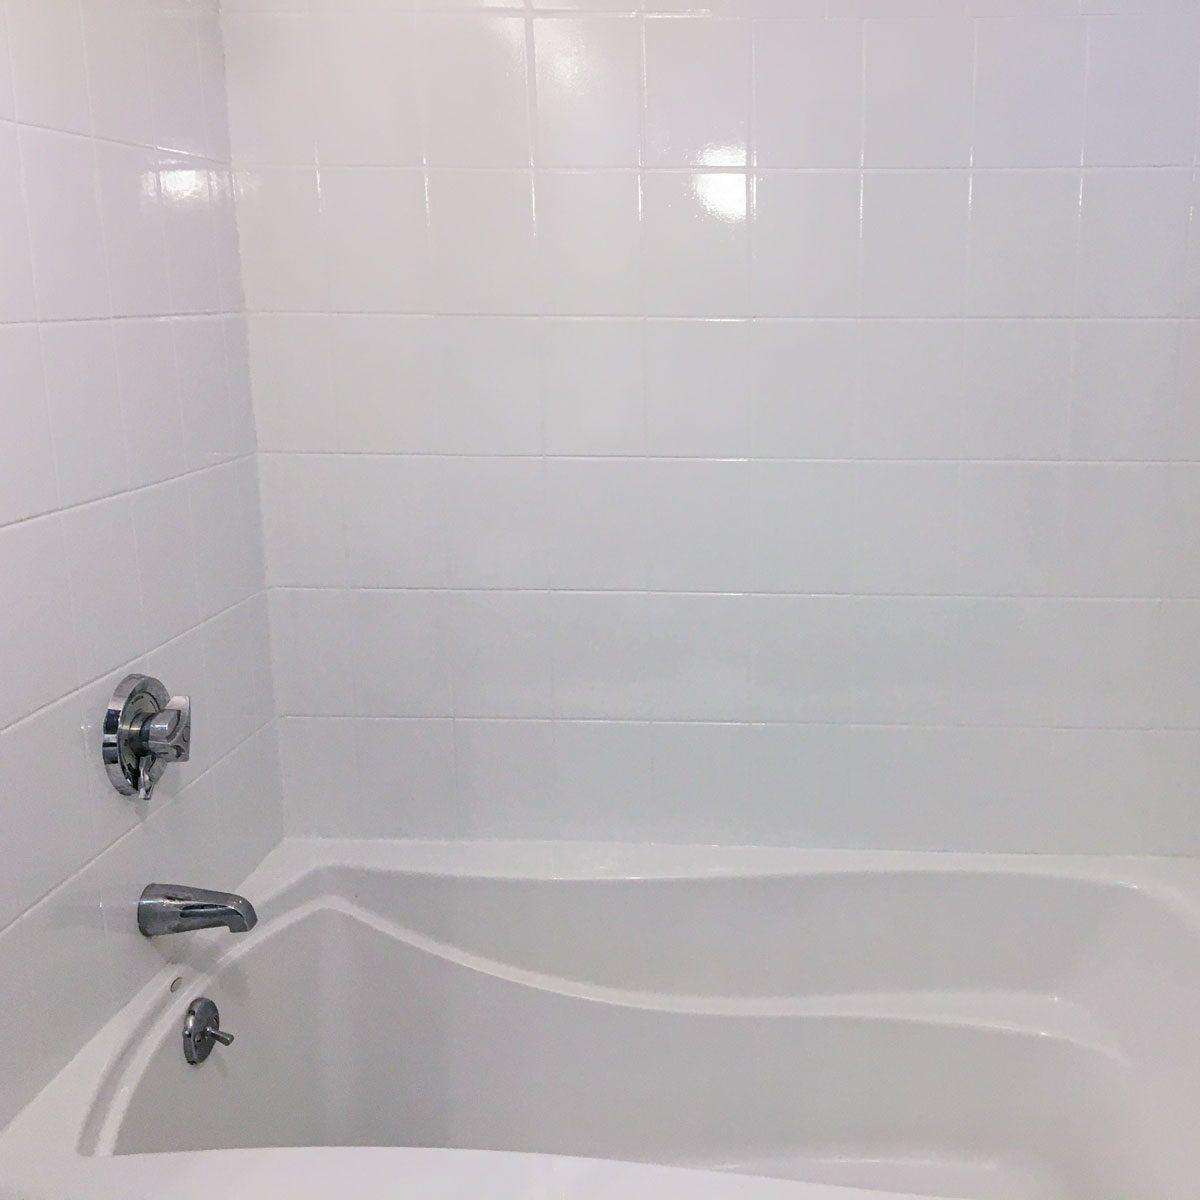 How To Refinish Your Bathroom Tile or Bathtub With a Kit